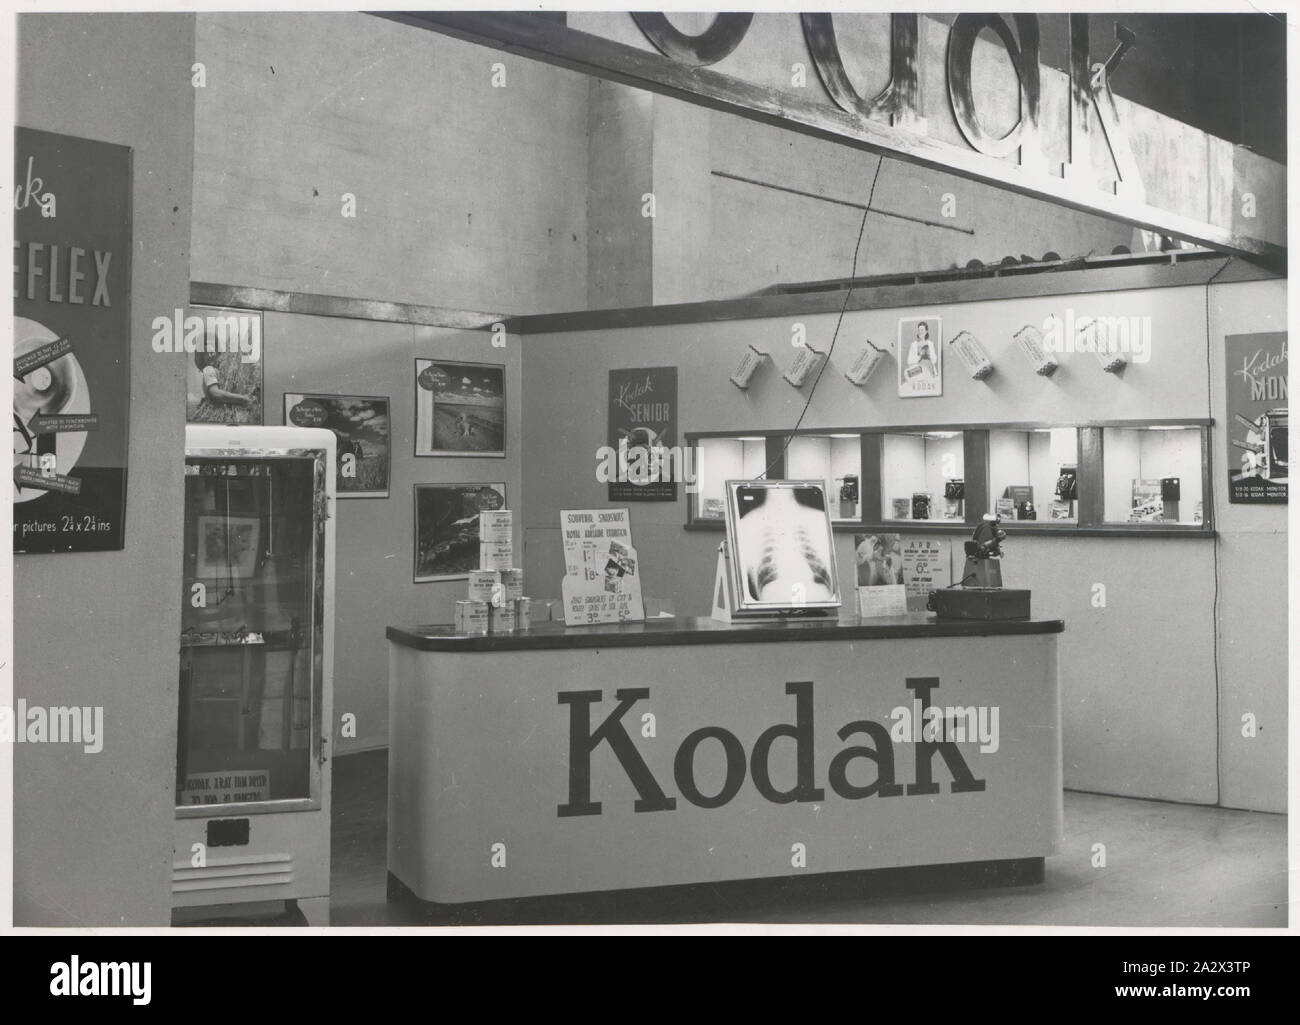 Photograph, Exhibition Stand, Chamber of Manufactures Exhibition, Adelaide, Mar - May 1947, Black and white photograph of a Kodak Australasia Pty Ltd exhibition stand or trade show booth at the Chamber of Manufactures Exhibition held from March to May 1947 in Adelaide. This view shows the service counter, drying cabinet, and wall of recessed display cameras with products and films arranged within. There are posters and x-ray film and photographs mounted around the display Stock Photo